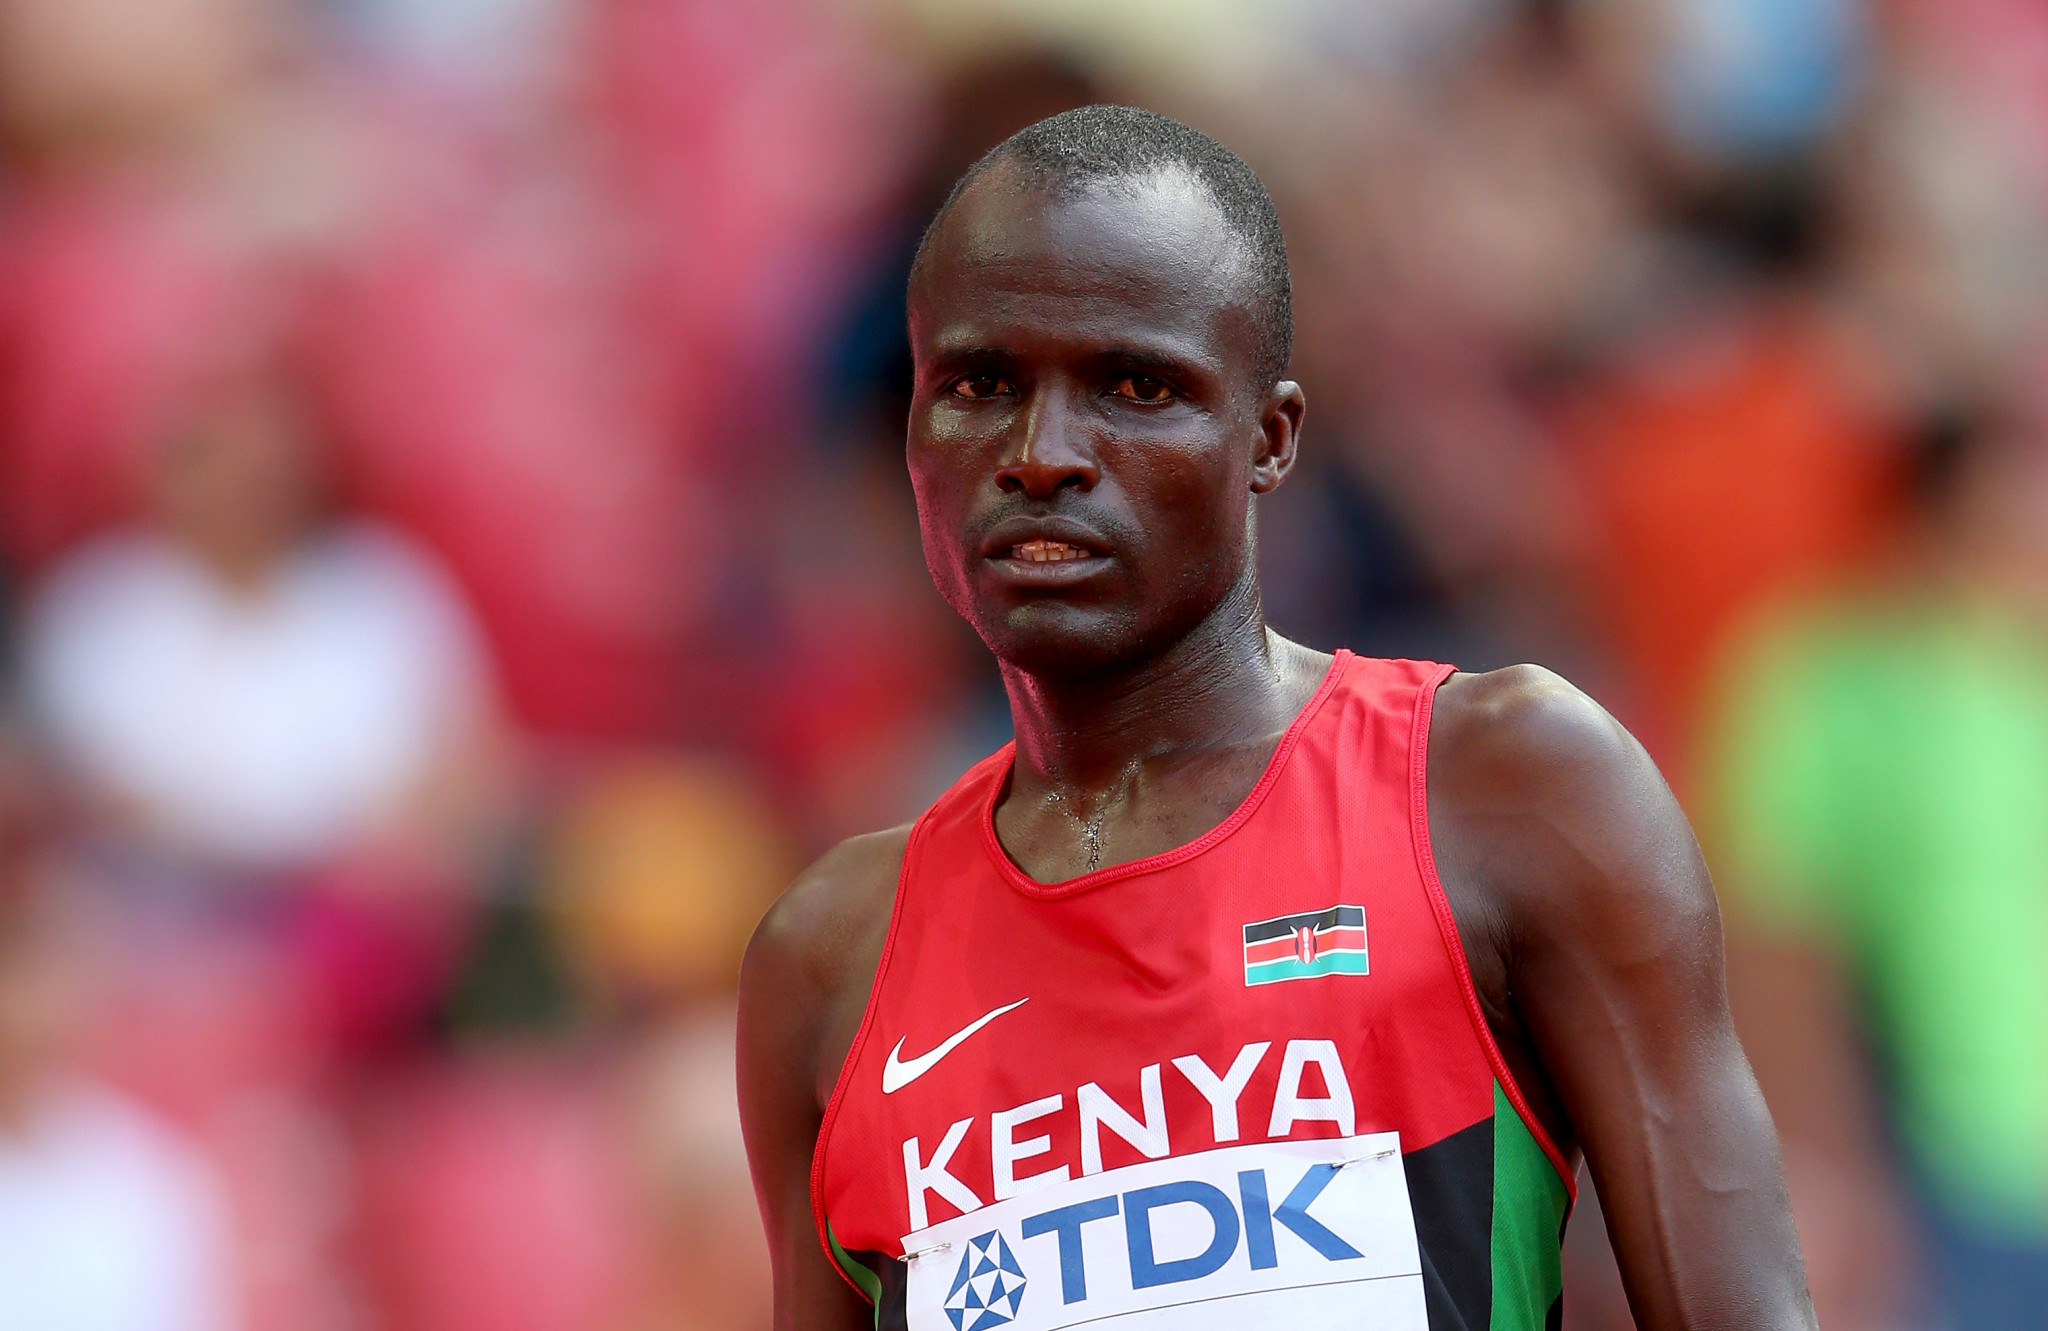 Edwin Soi was Kenya's highest-placed finisher in the men's 10,000m event at the 2019 African Games, coming fourth ©Getty Images